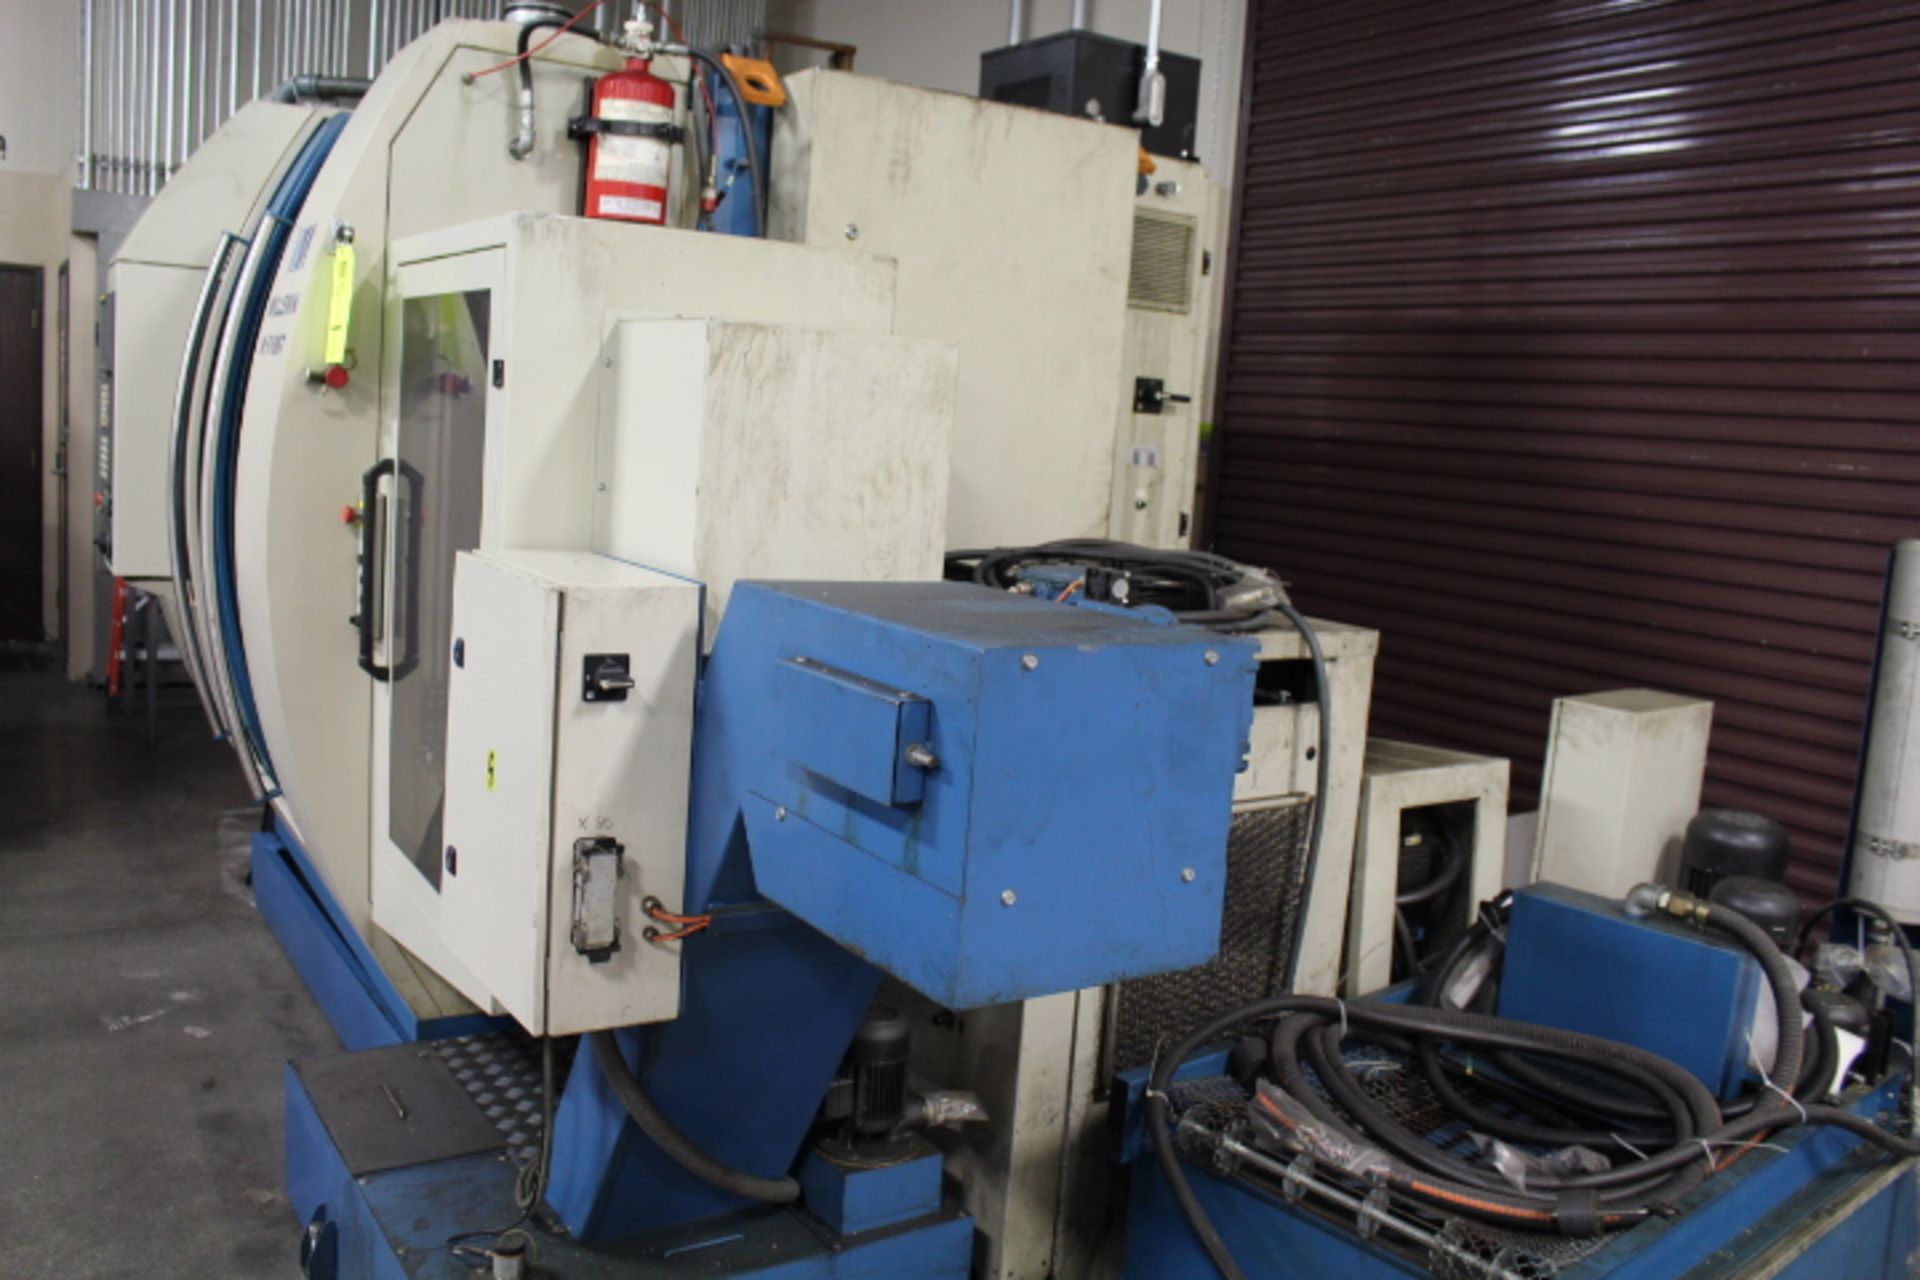 2007 WILLEMIN CNC MILL/TURNING LATHE, MODEL 518MT 7-AXIS, GE SERIES FANUC 16i-MB CNC CONTROL, 72 ATC - Image 15 of 38